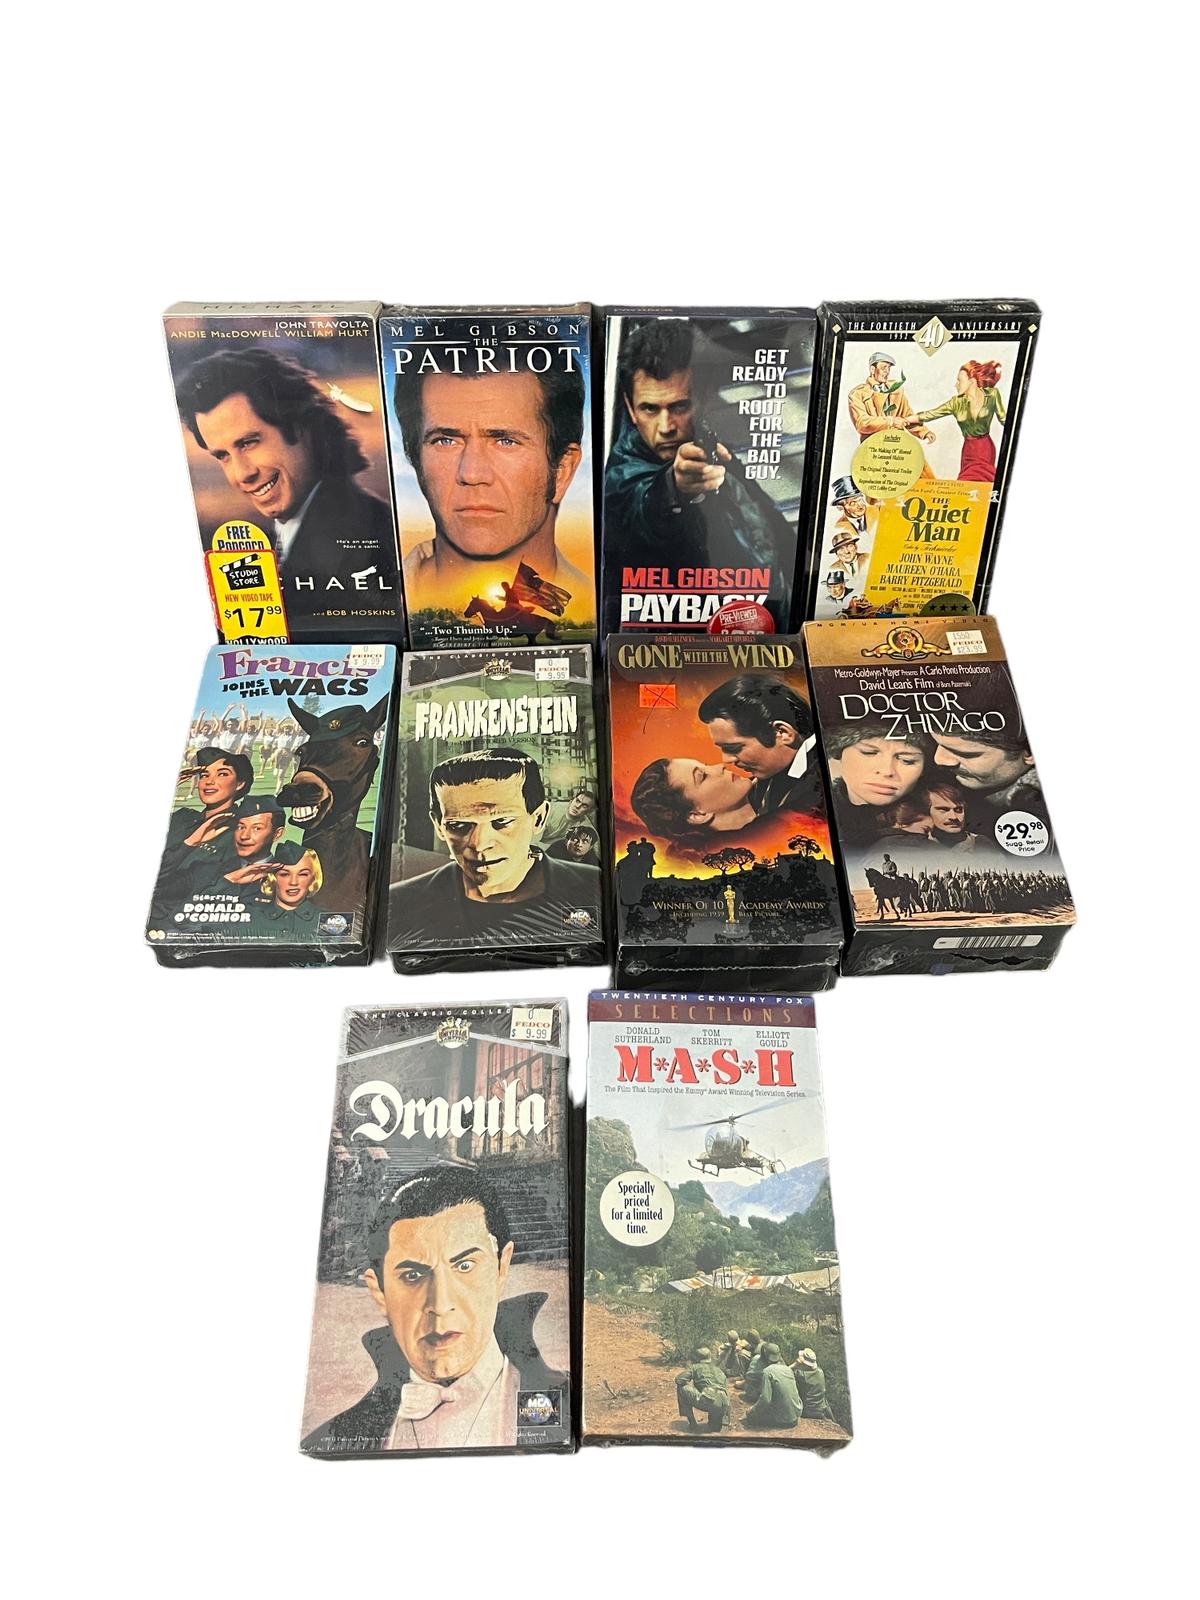 Vintage Sealed VHS Video Tape Collection Lot